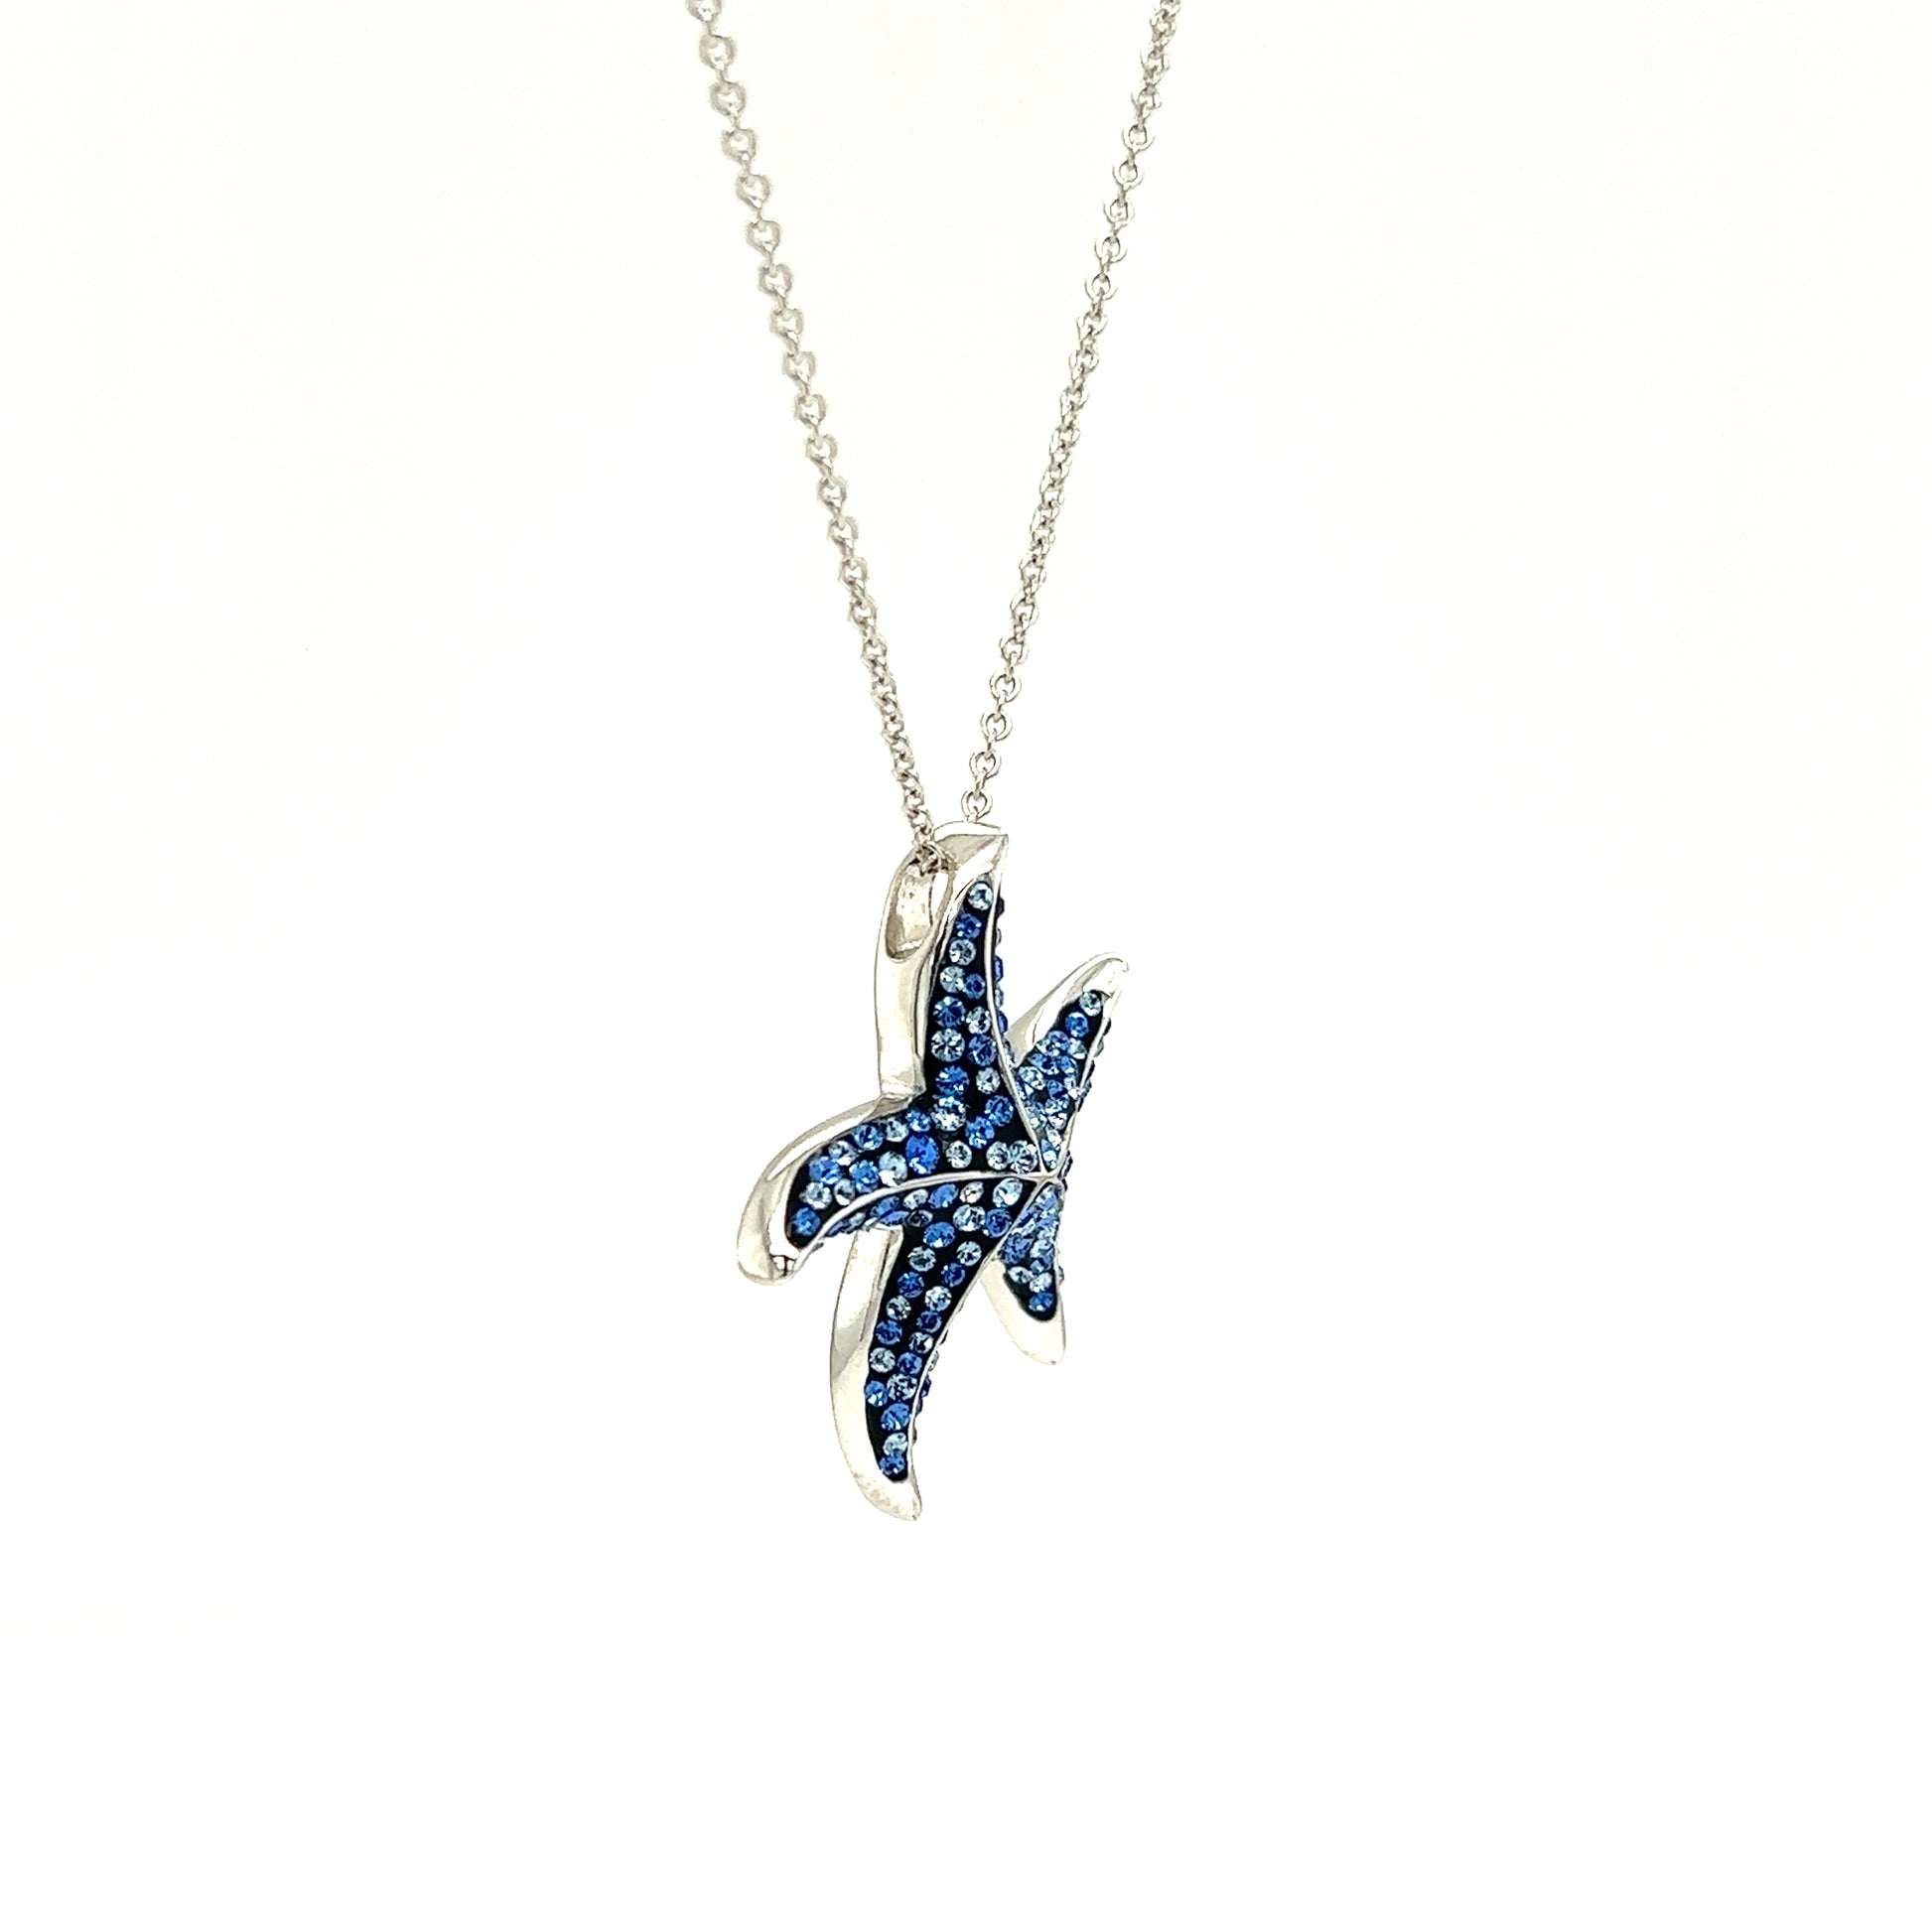 Blue Starfish Necklace with Aqua and White Crystals in Sterling Silver Left Side View